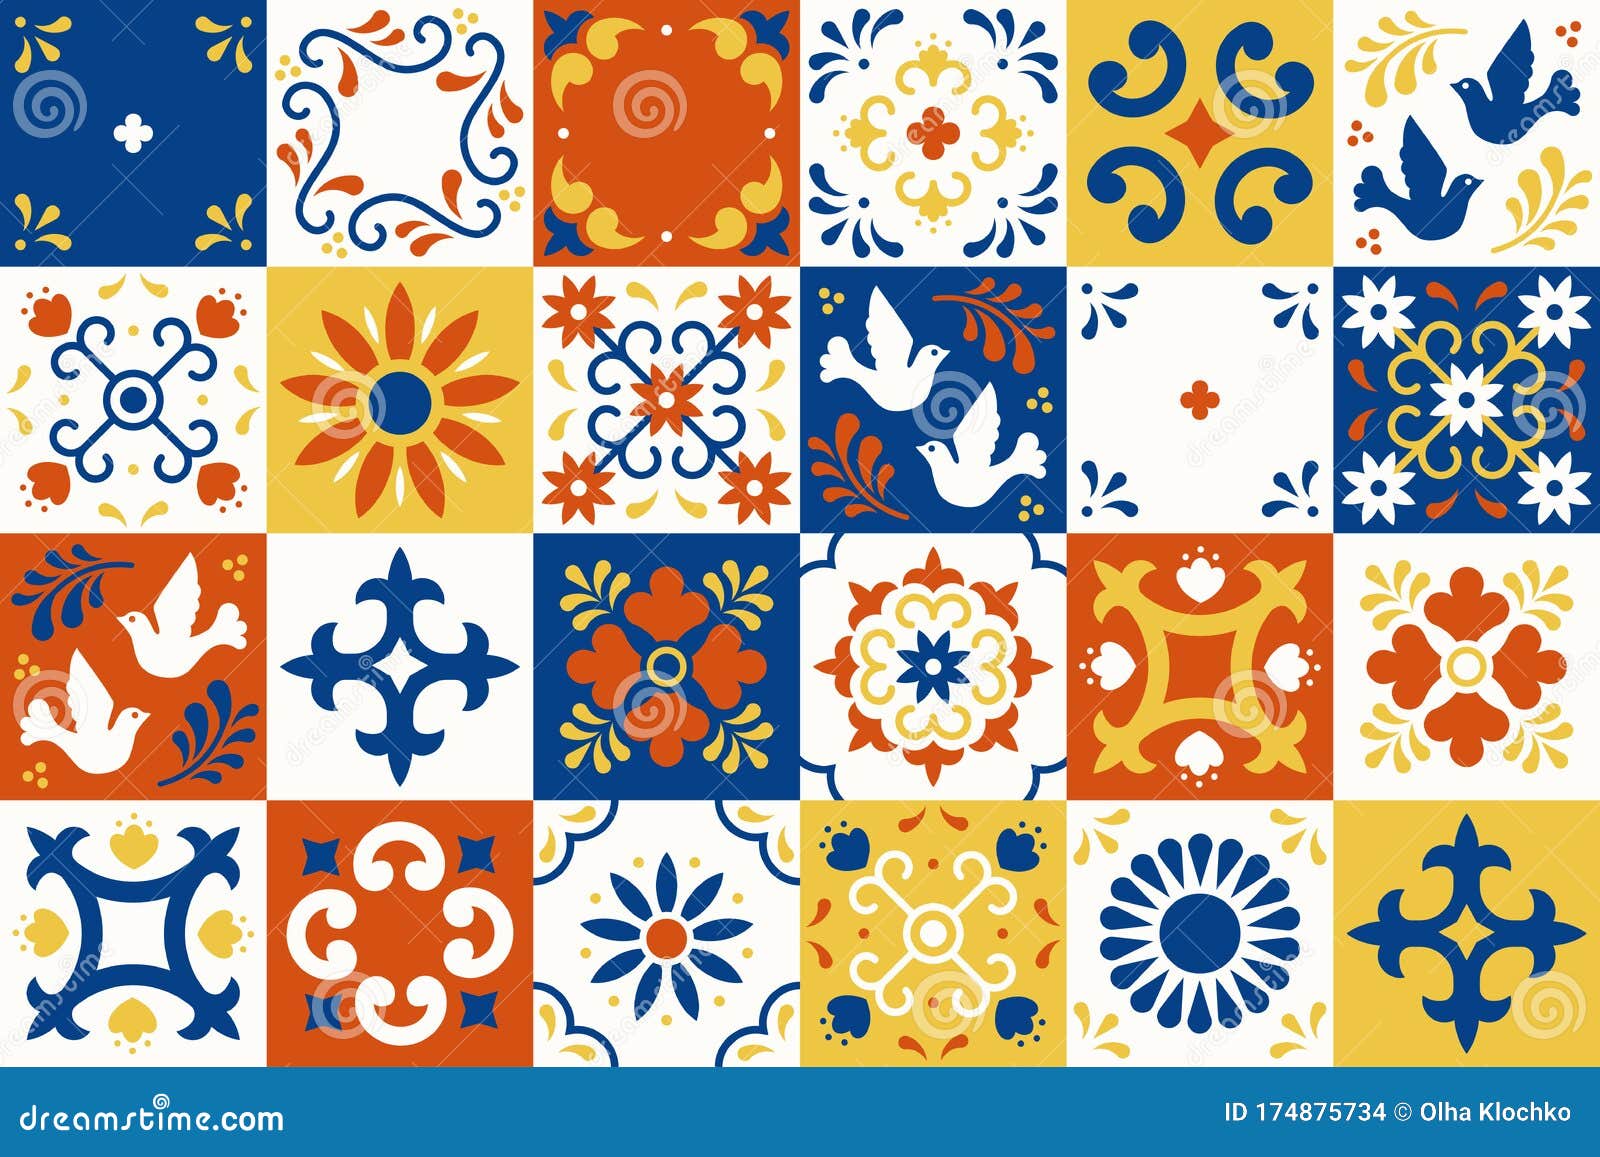 mexican talavera pattern. ceramic tiles with flower, leaves and bird ornaments in traditional majolica style from puebla